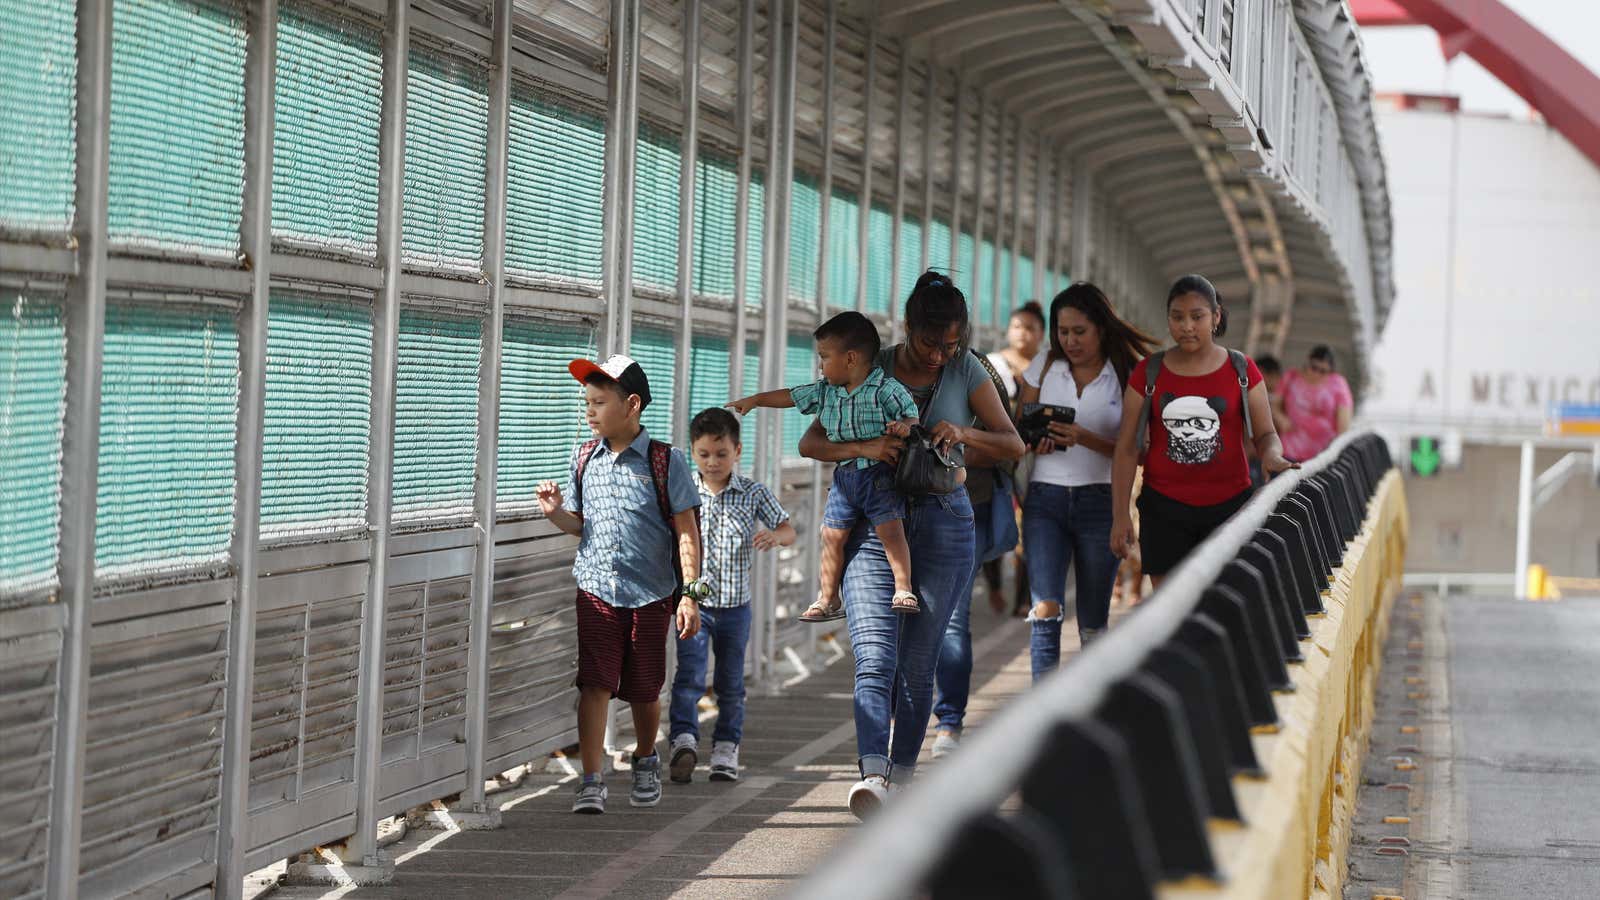 Both economic crisis and immigration enforcement drove the migration of US-born minors to Mexico in the second half of the 2000s.